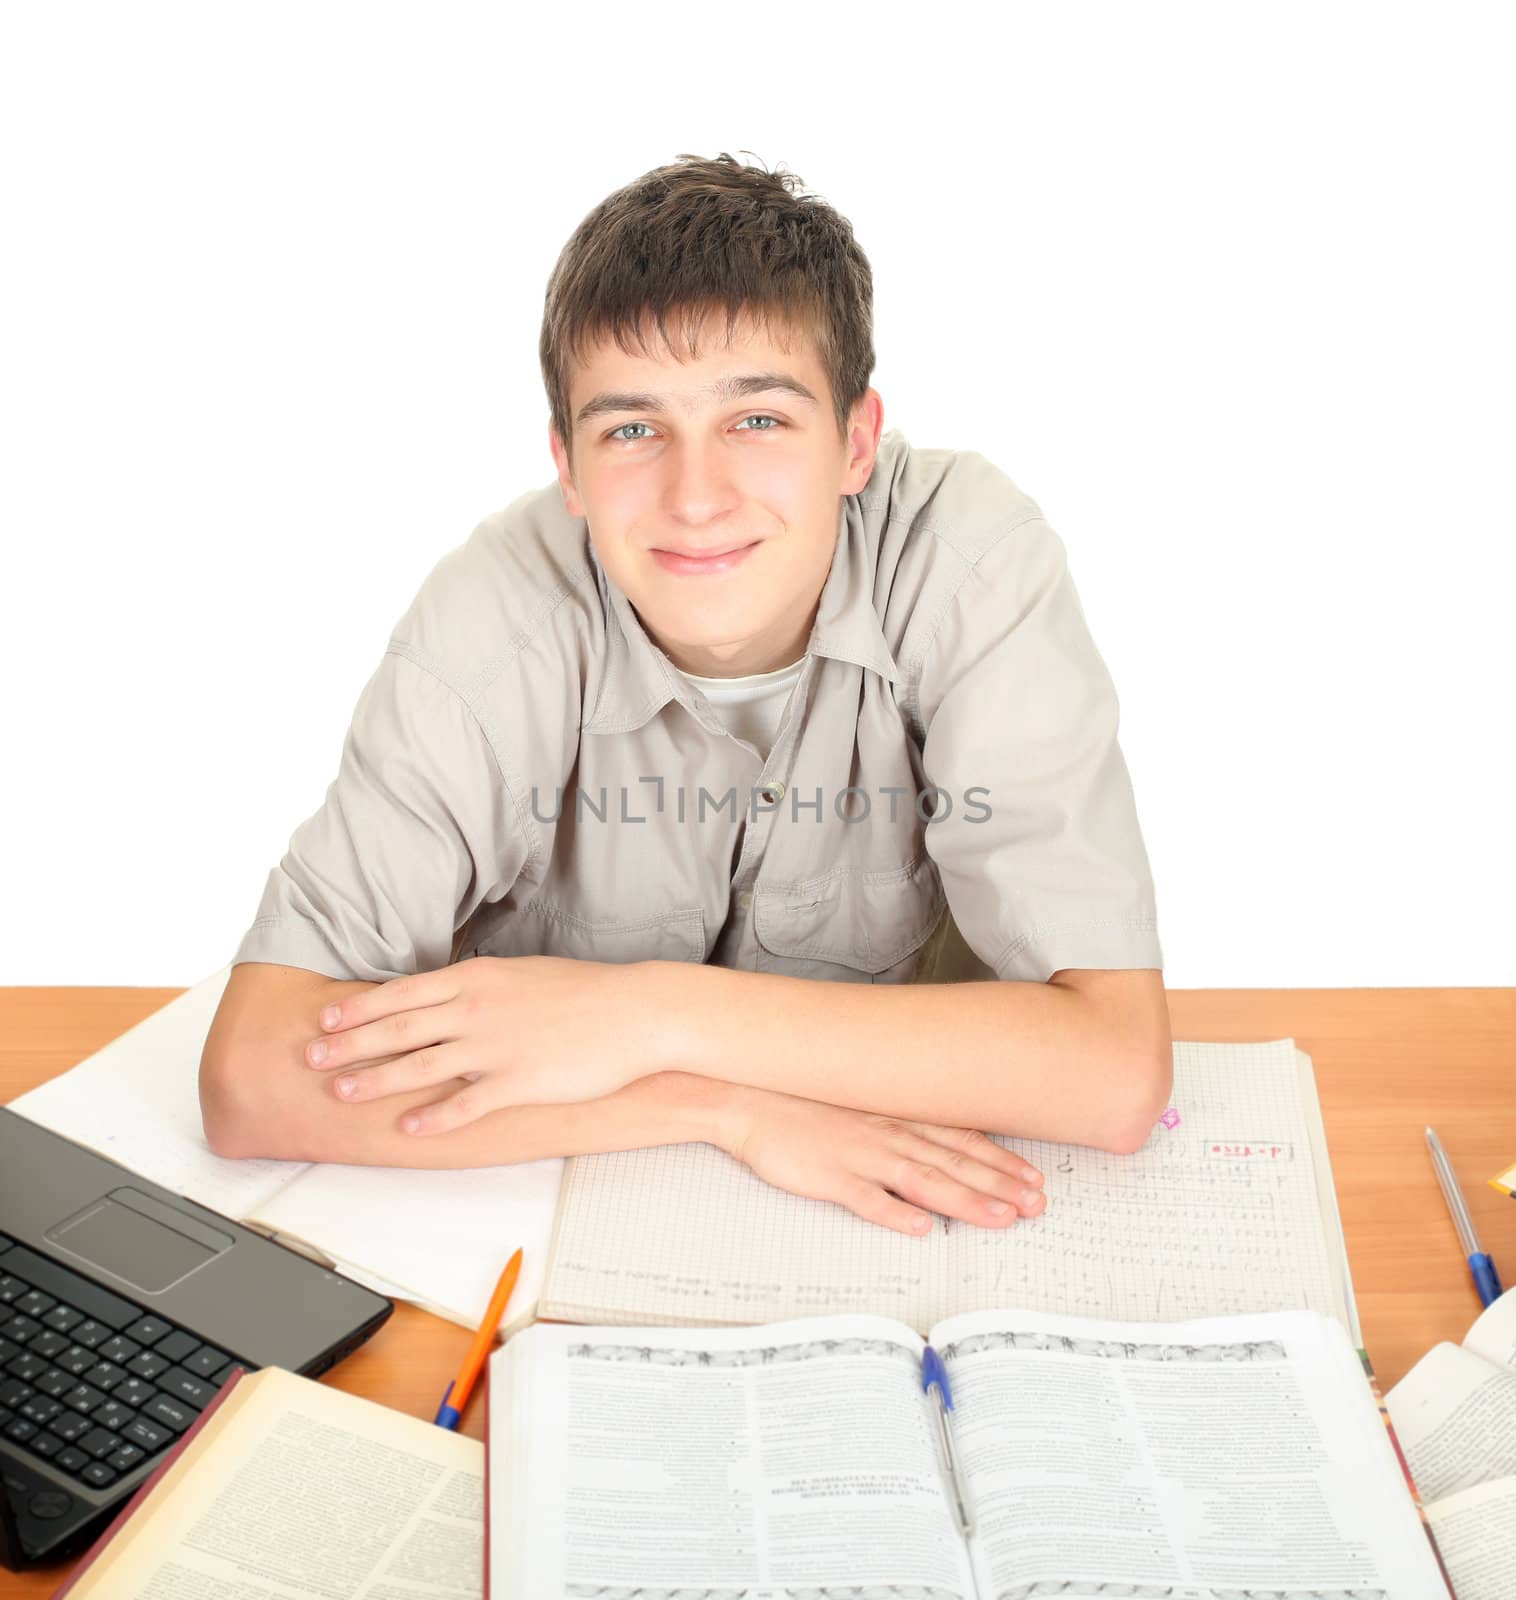 Student on the School Desk. Isolated on the White Background